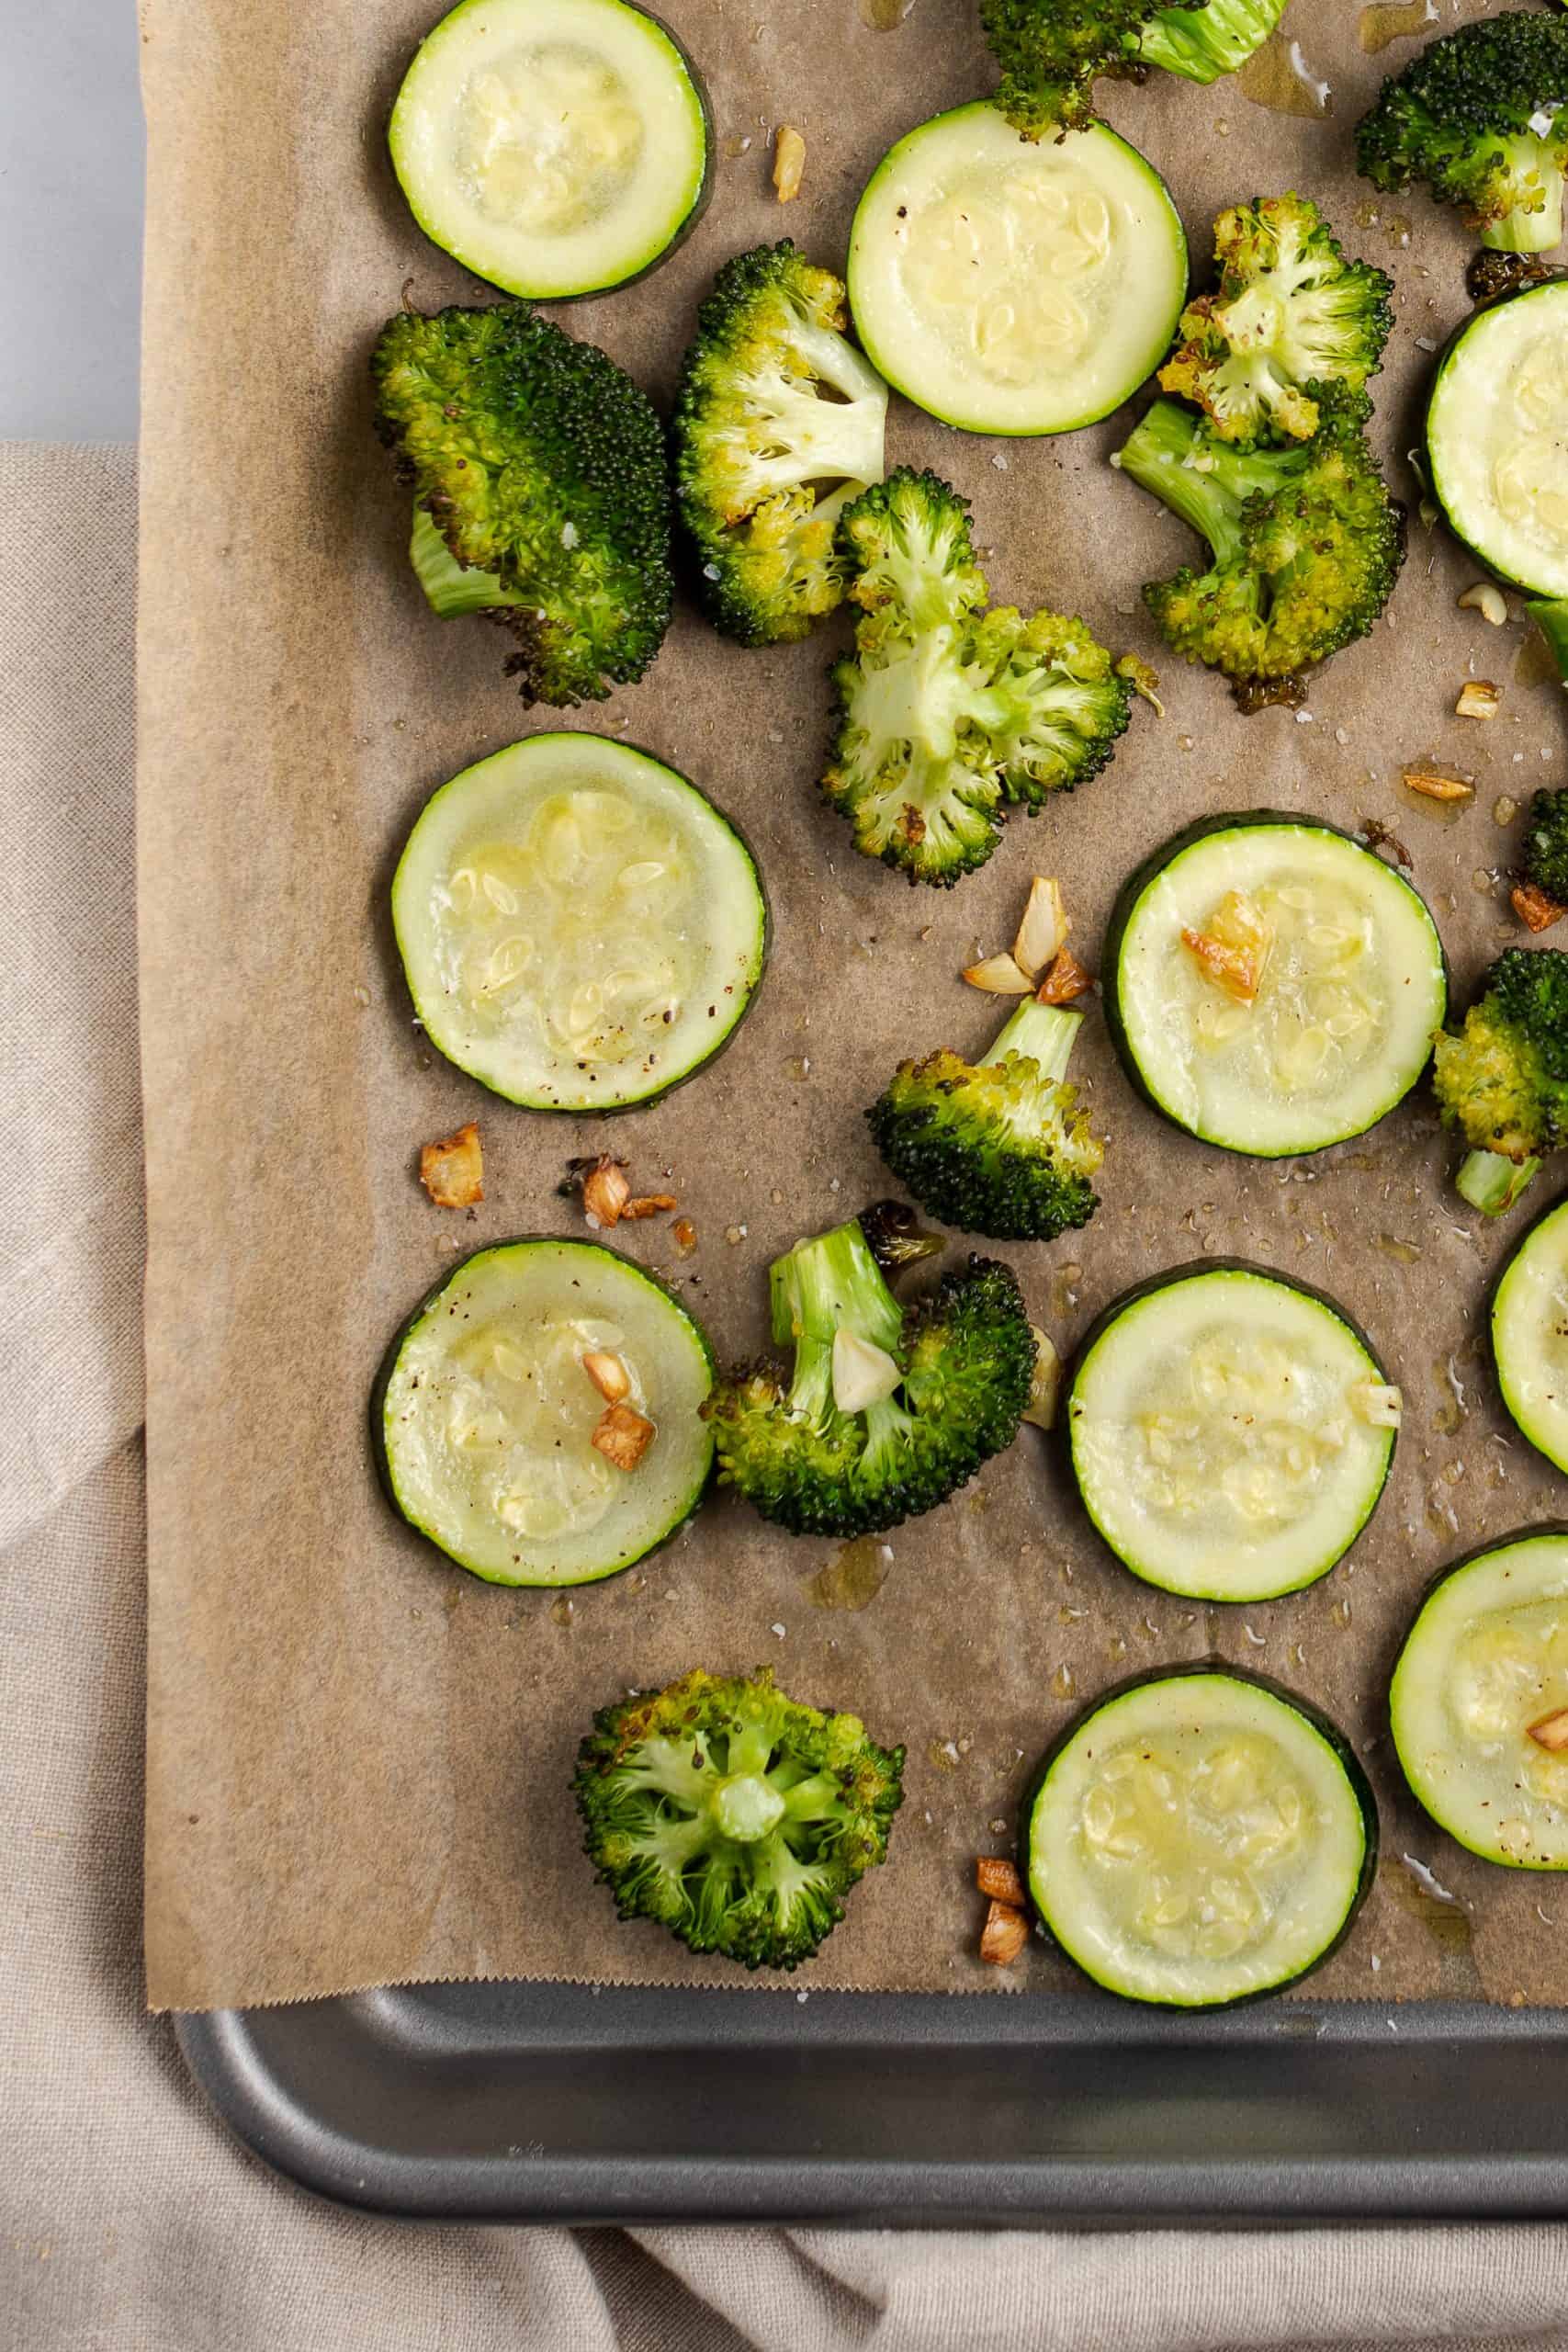 Parchment paper covered sheet pan with roasted broccoli and zucchini with fresh garlic.